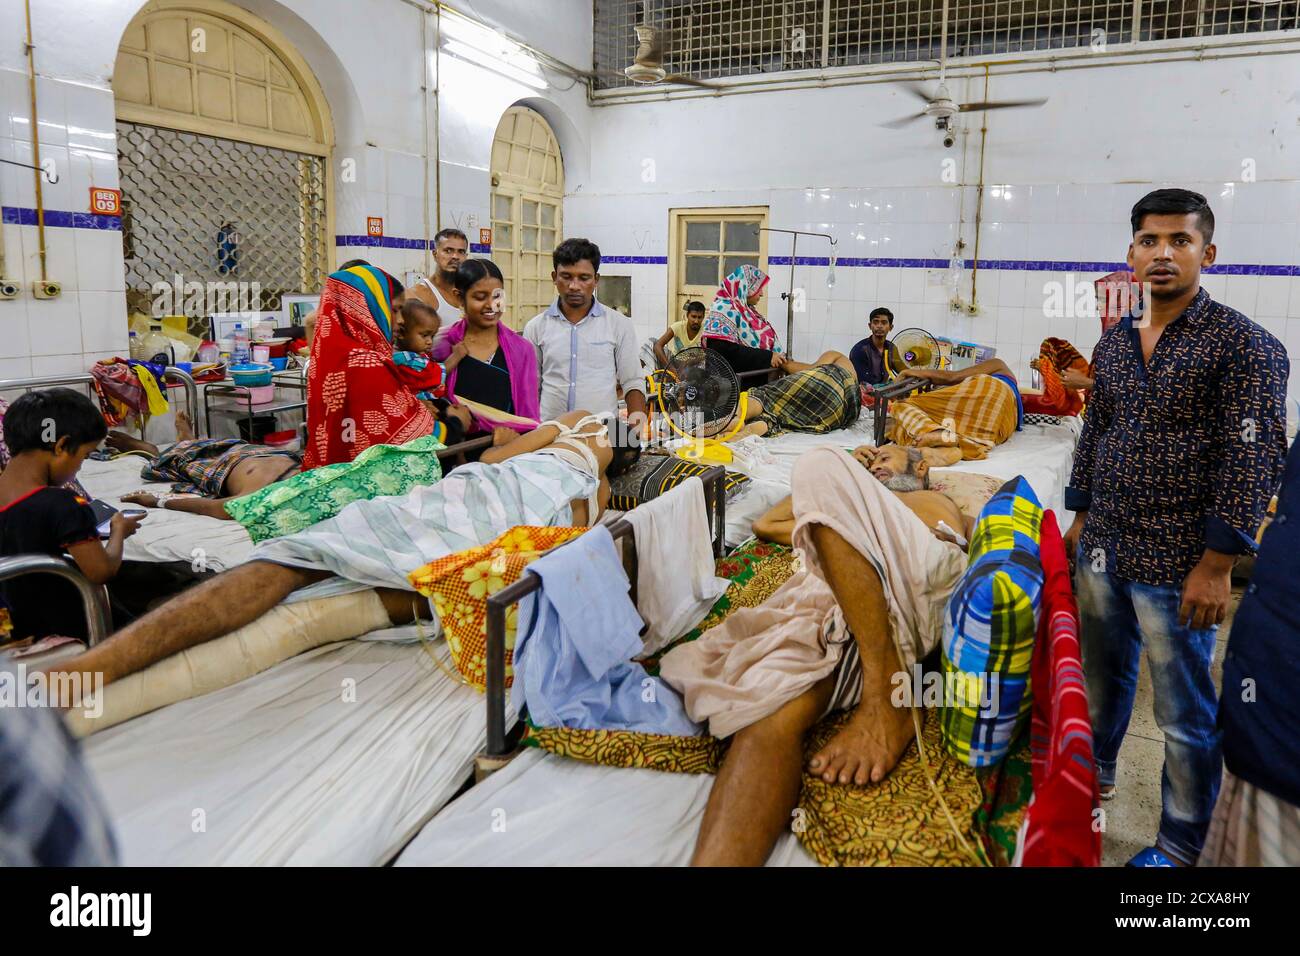 The Dhaka Medical College Hospital struggles to handle the rush of patients five times beyond its capacity. As a result, patients and their attendees Stock Photo